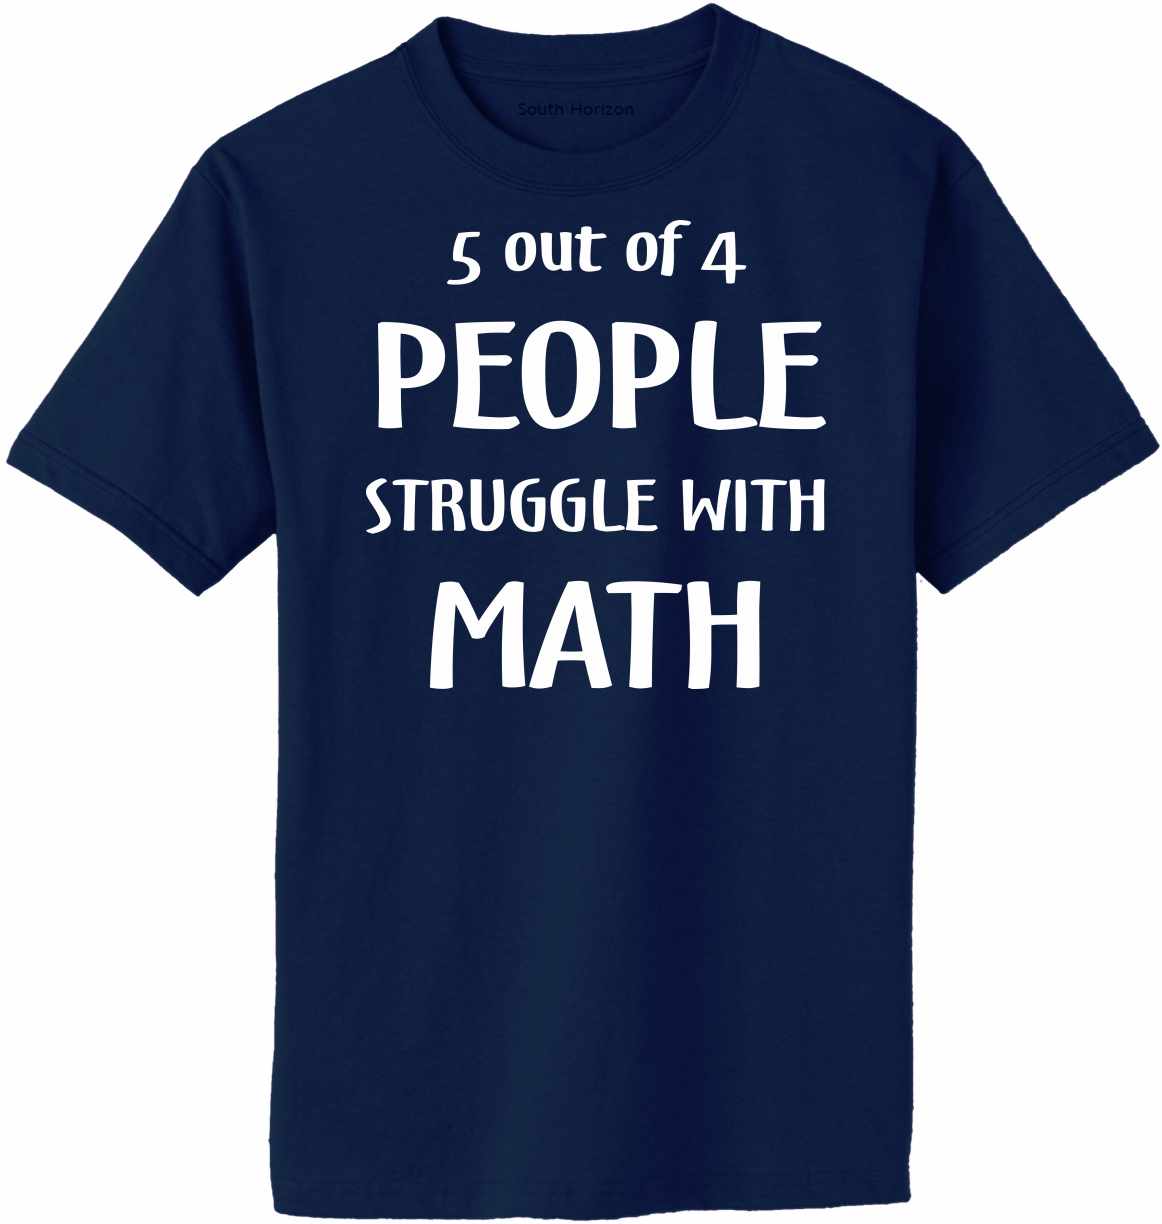 5 of 4 People Struggle with Math Adult T-Shirt (#1048-1)